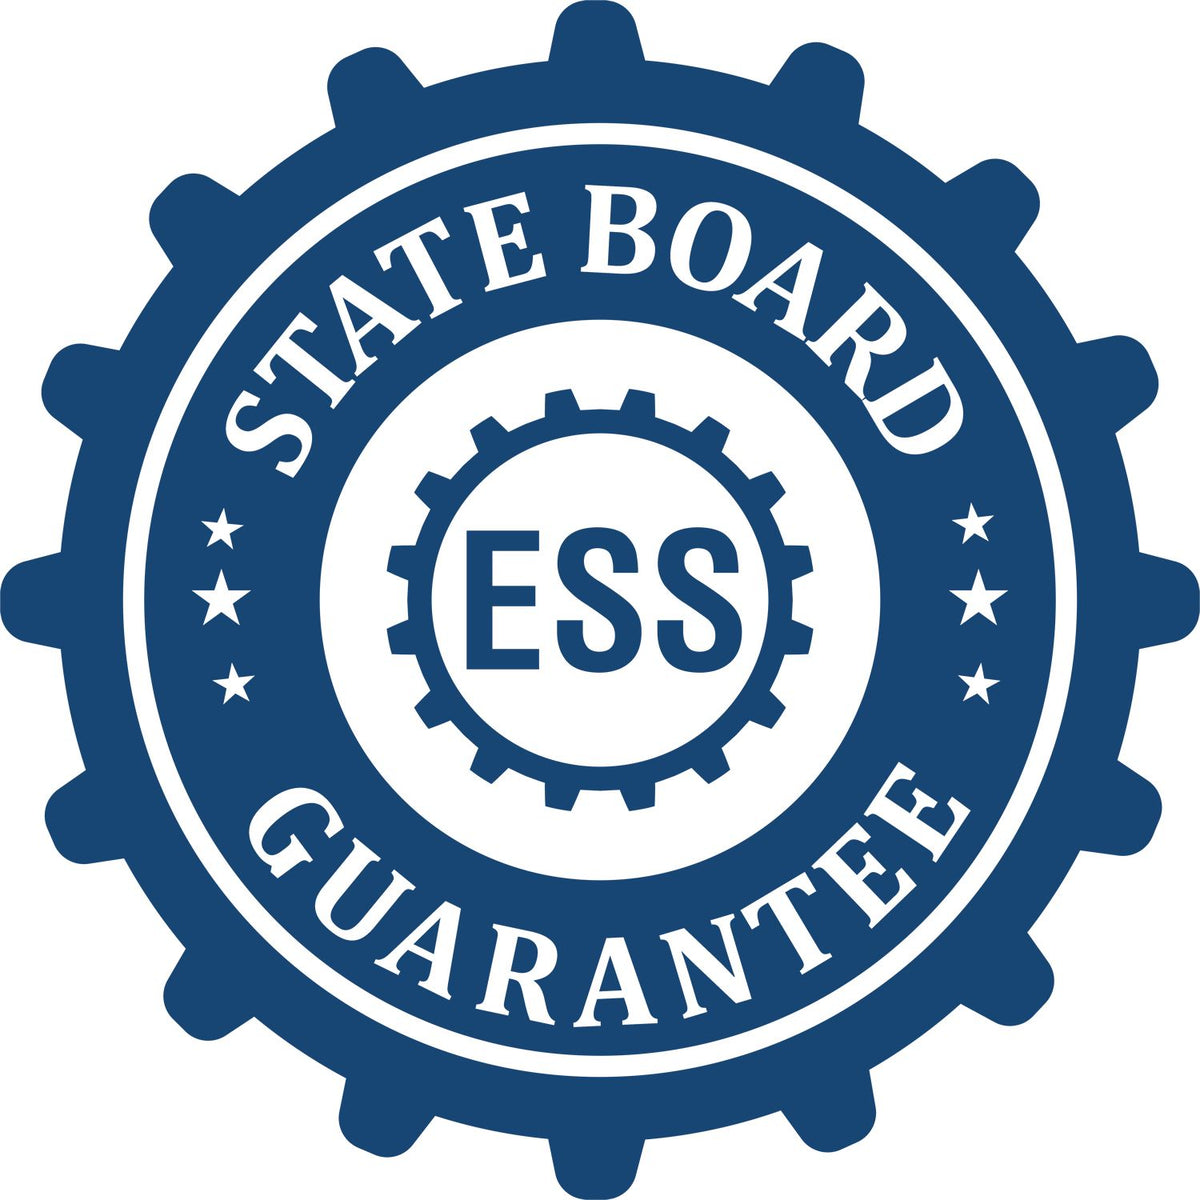 An emblem in a gear shape illustrating a state board guarantee for the Digital Georgia Geologist Stamp, Electronic Seal for Georgia Geologist